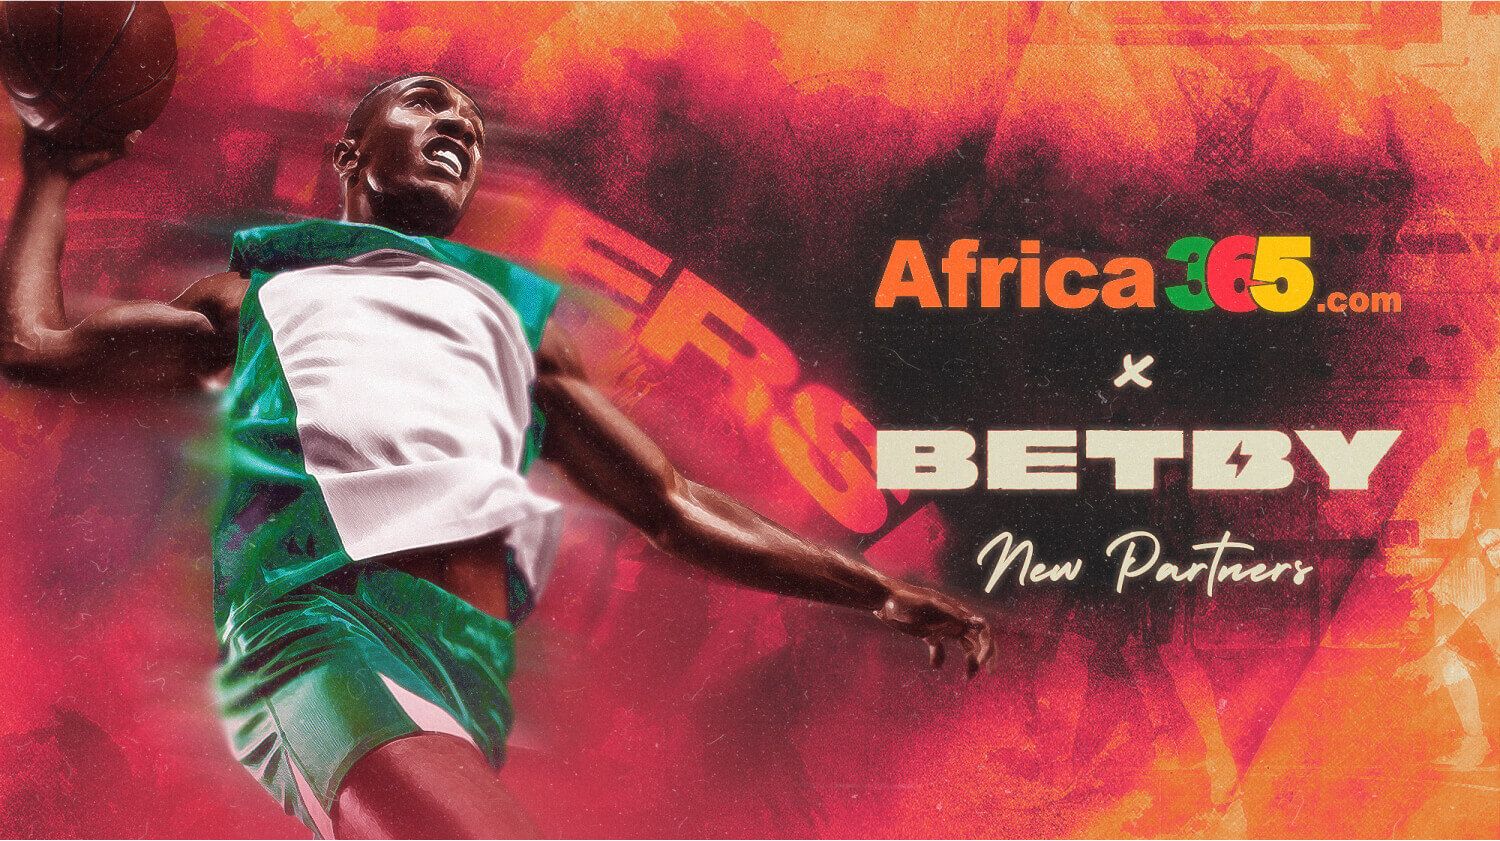 BETBY establishes partnership with Africa365.com